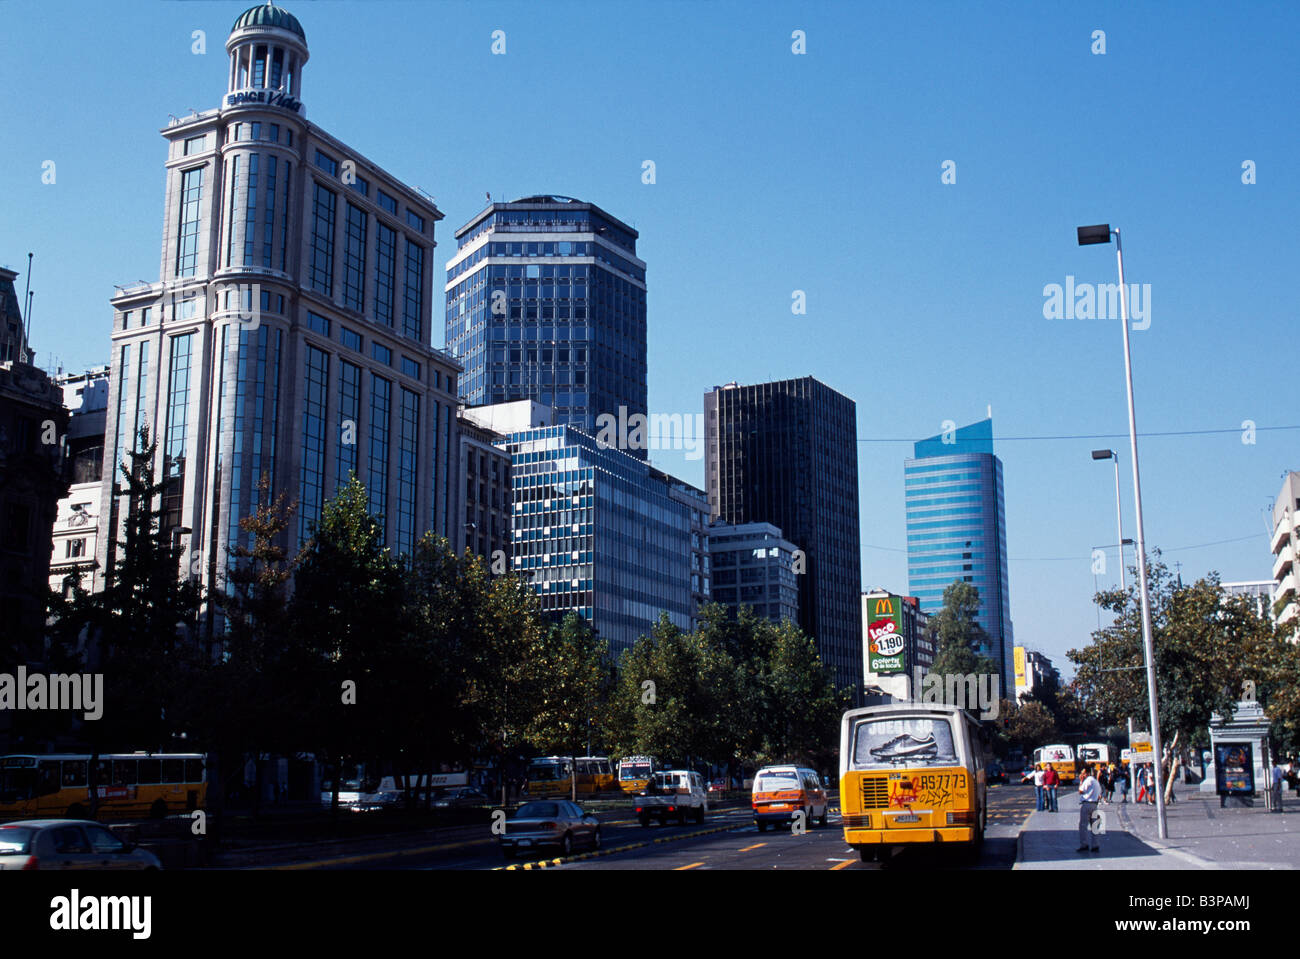 Chile, Santiago. Avenida del Libertador Bernardo O'Higgins, Santiago's main east-west throughfare, colloquially known as La Alameda, is a busy dual carriageway flanked by a mix of old colonial buildings and striking modern skyscrapers. Stock Photo